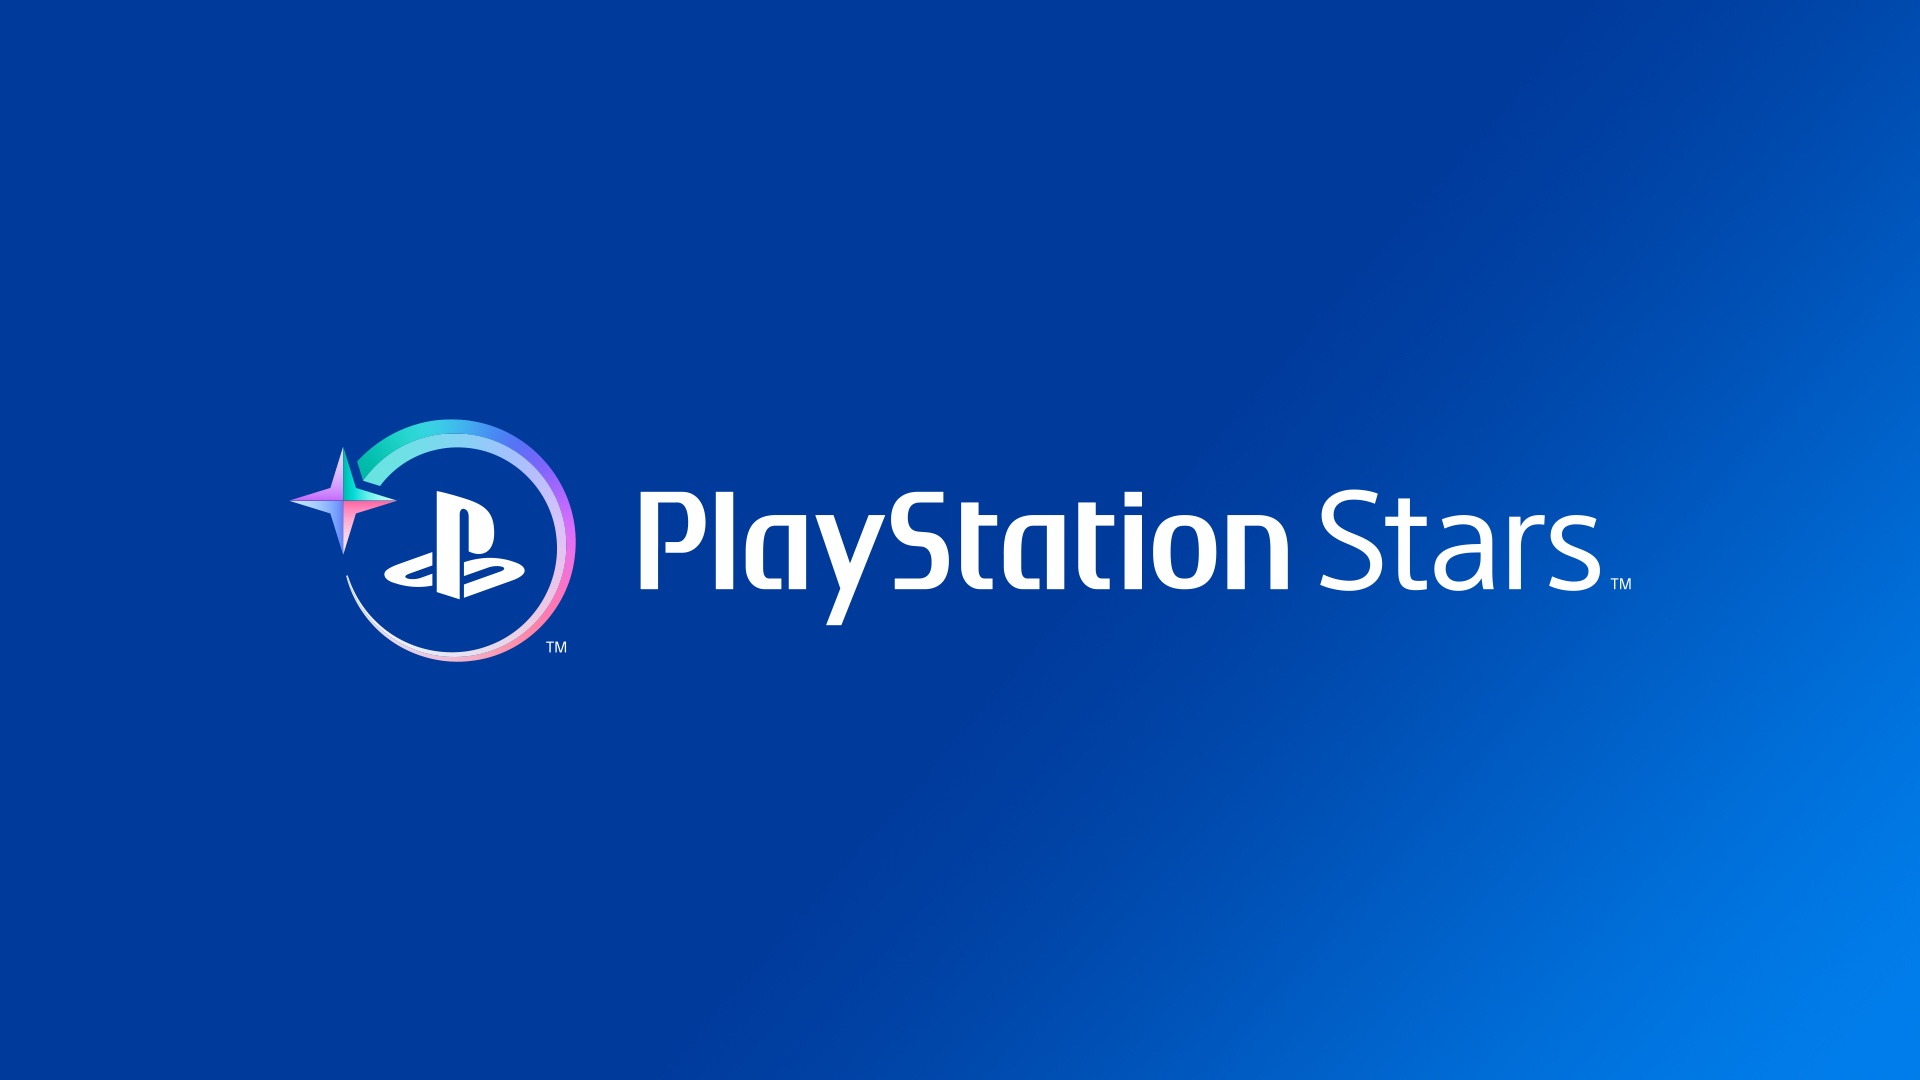 Playstation europe live chat